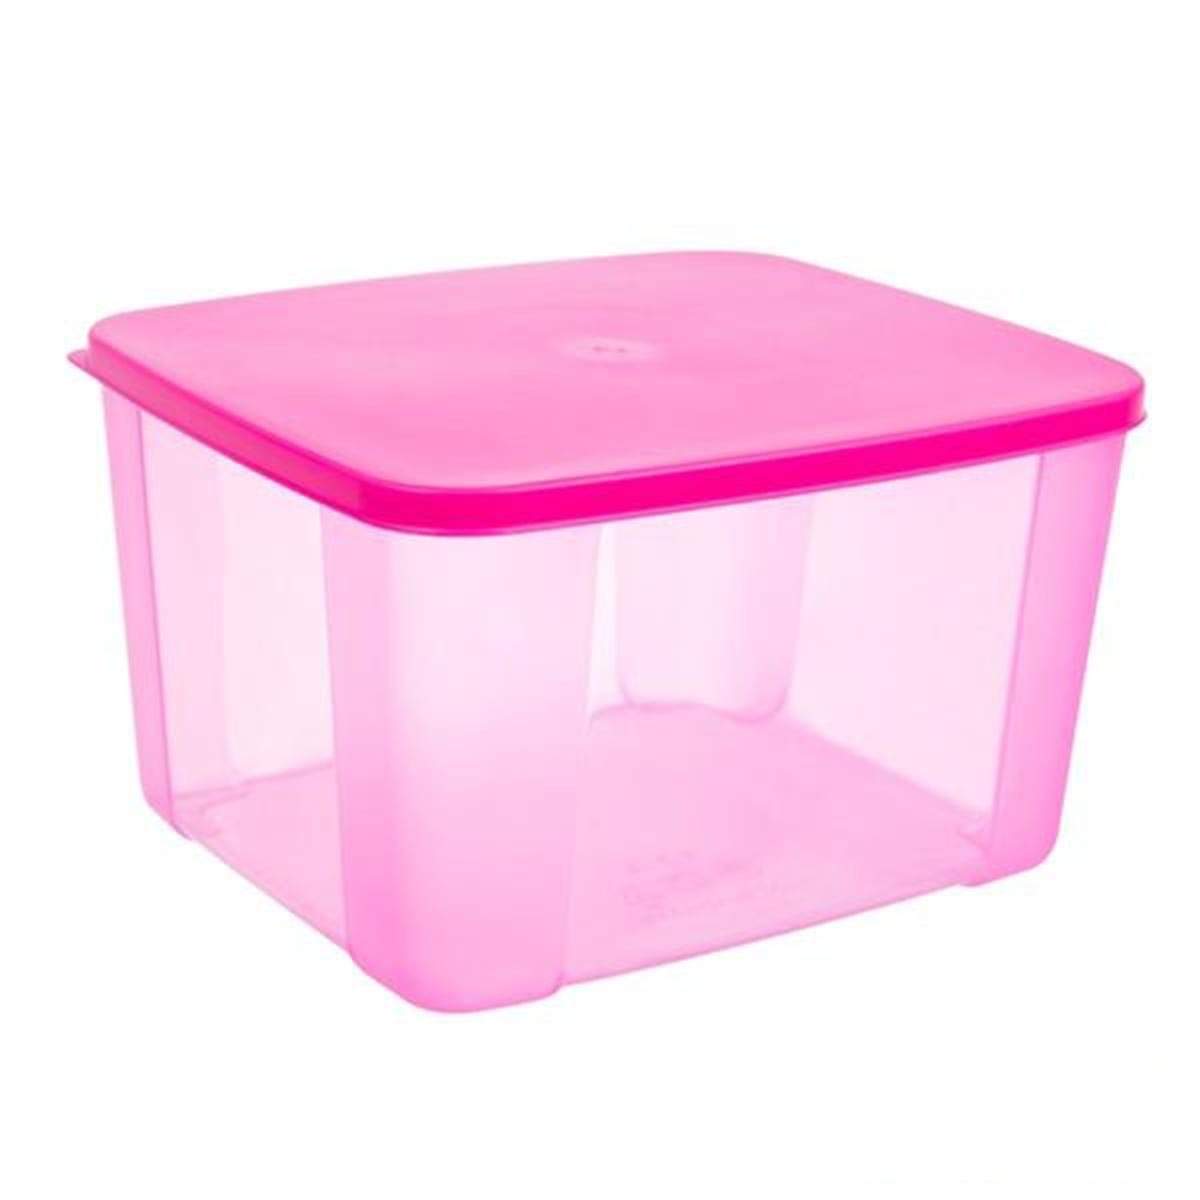 0109 Food Container 4.3L